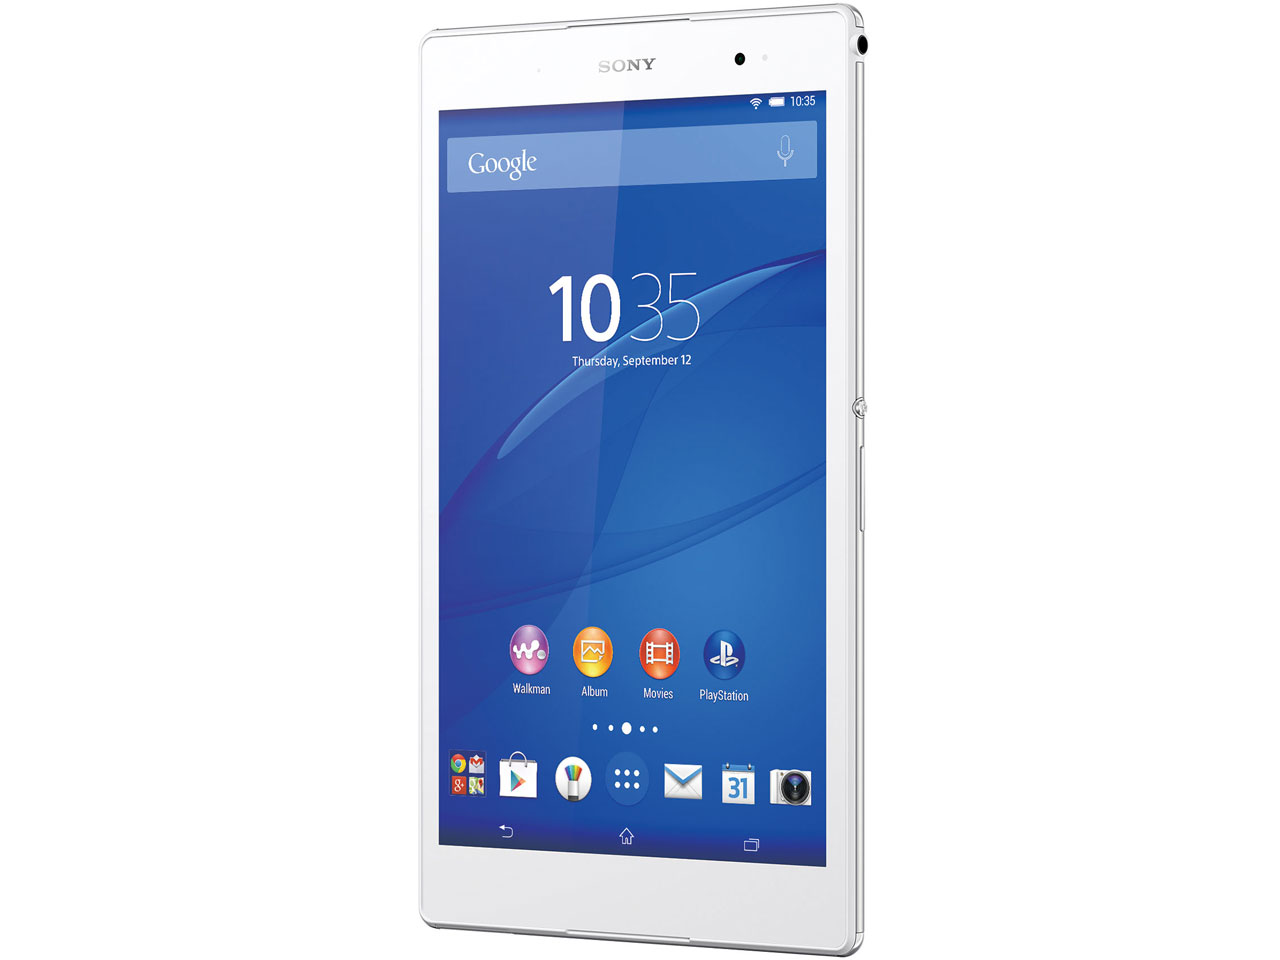 Xperia Z3 Tablet Compact Wi-Fiモデル 16GB SGP611JP/W [ホワイト]の価格  【SONY】と詳細ページ、NOTE/PC PC【ディスクグループ】